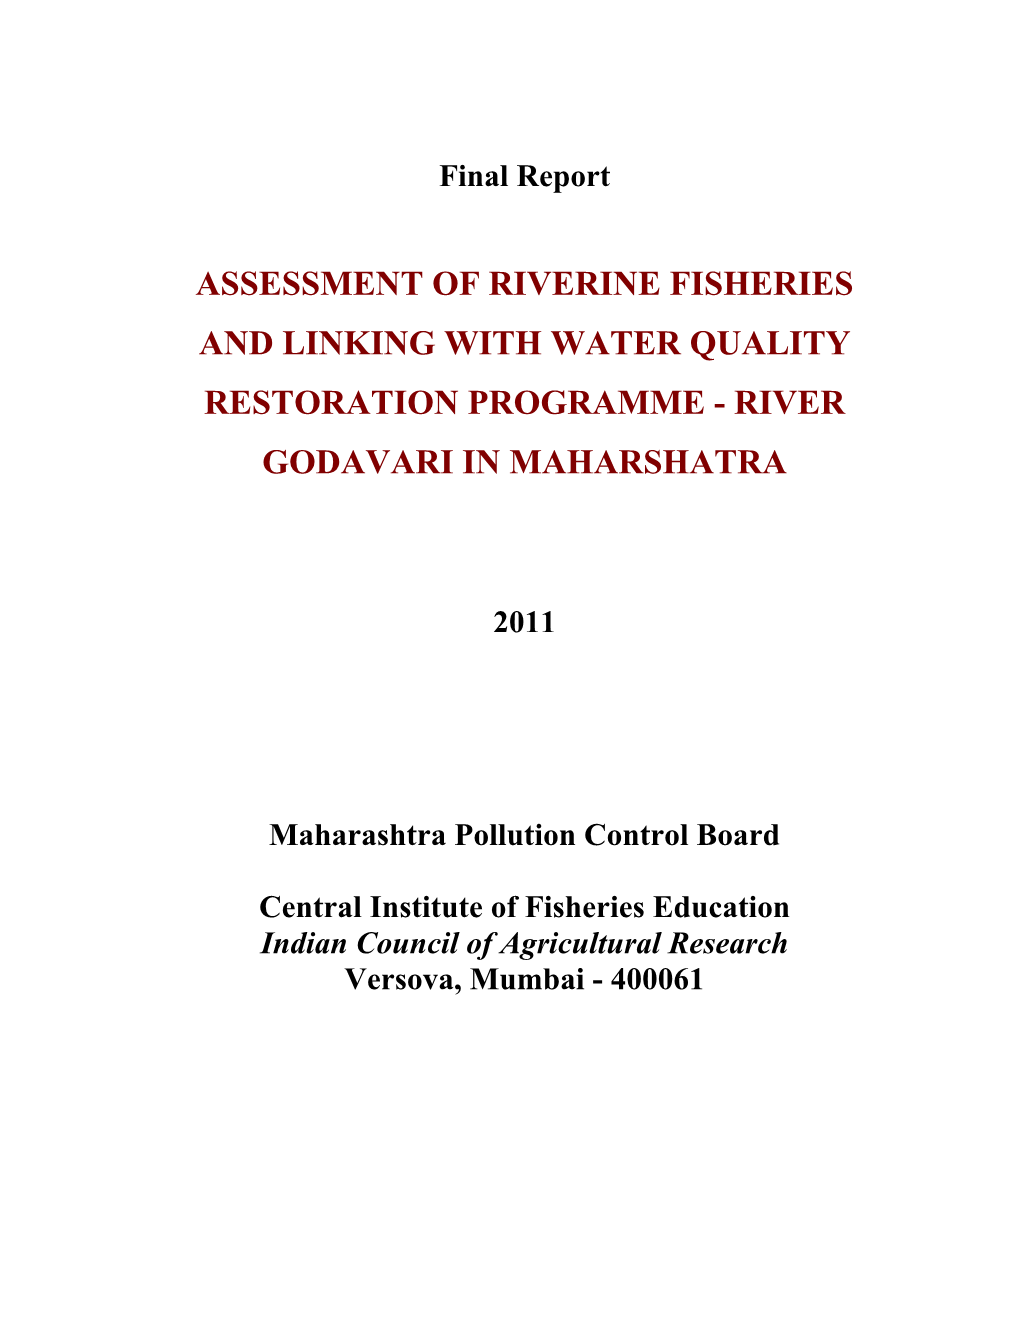 Assessment of Riverine Fisheries and Linking with Water Quality Restoration Programme - River Godavari in Maharshatra